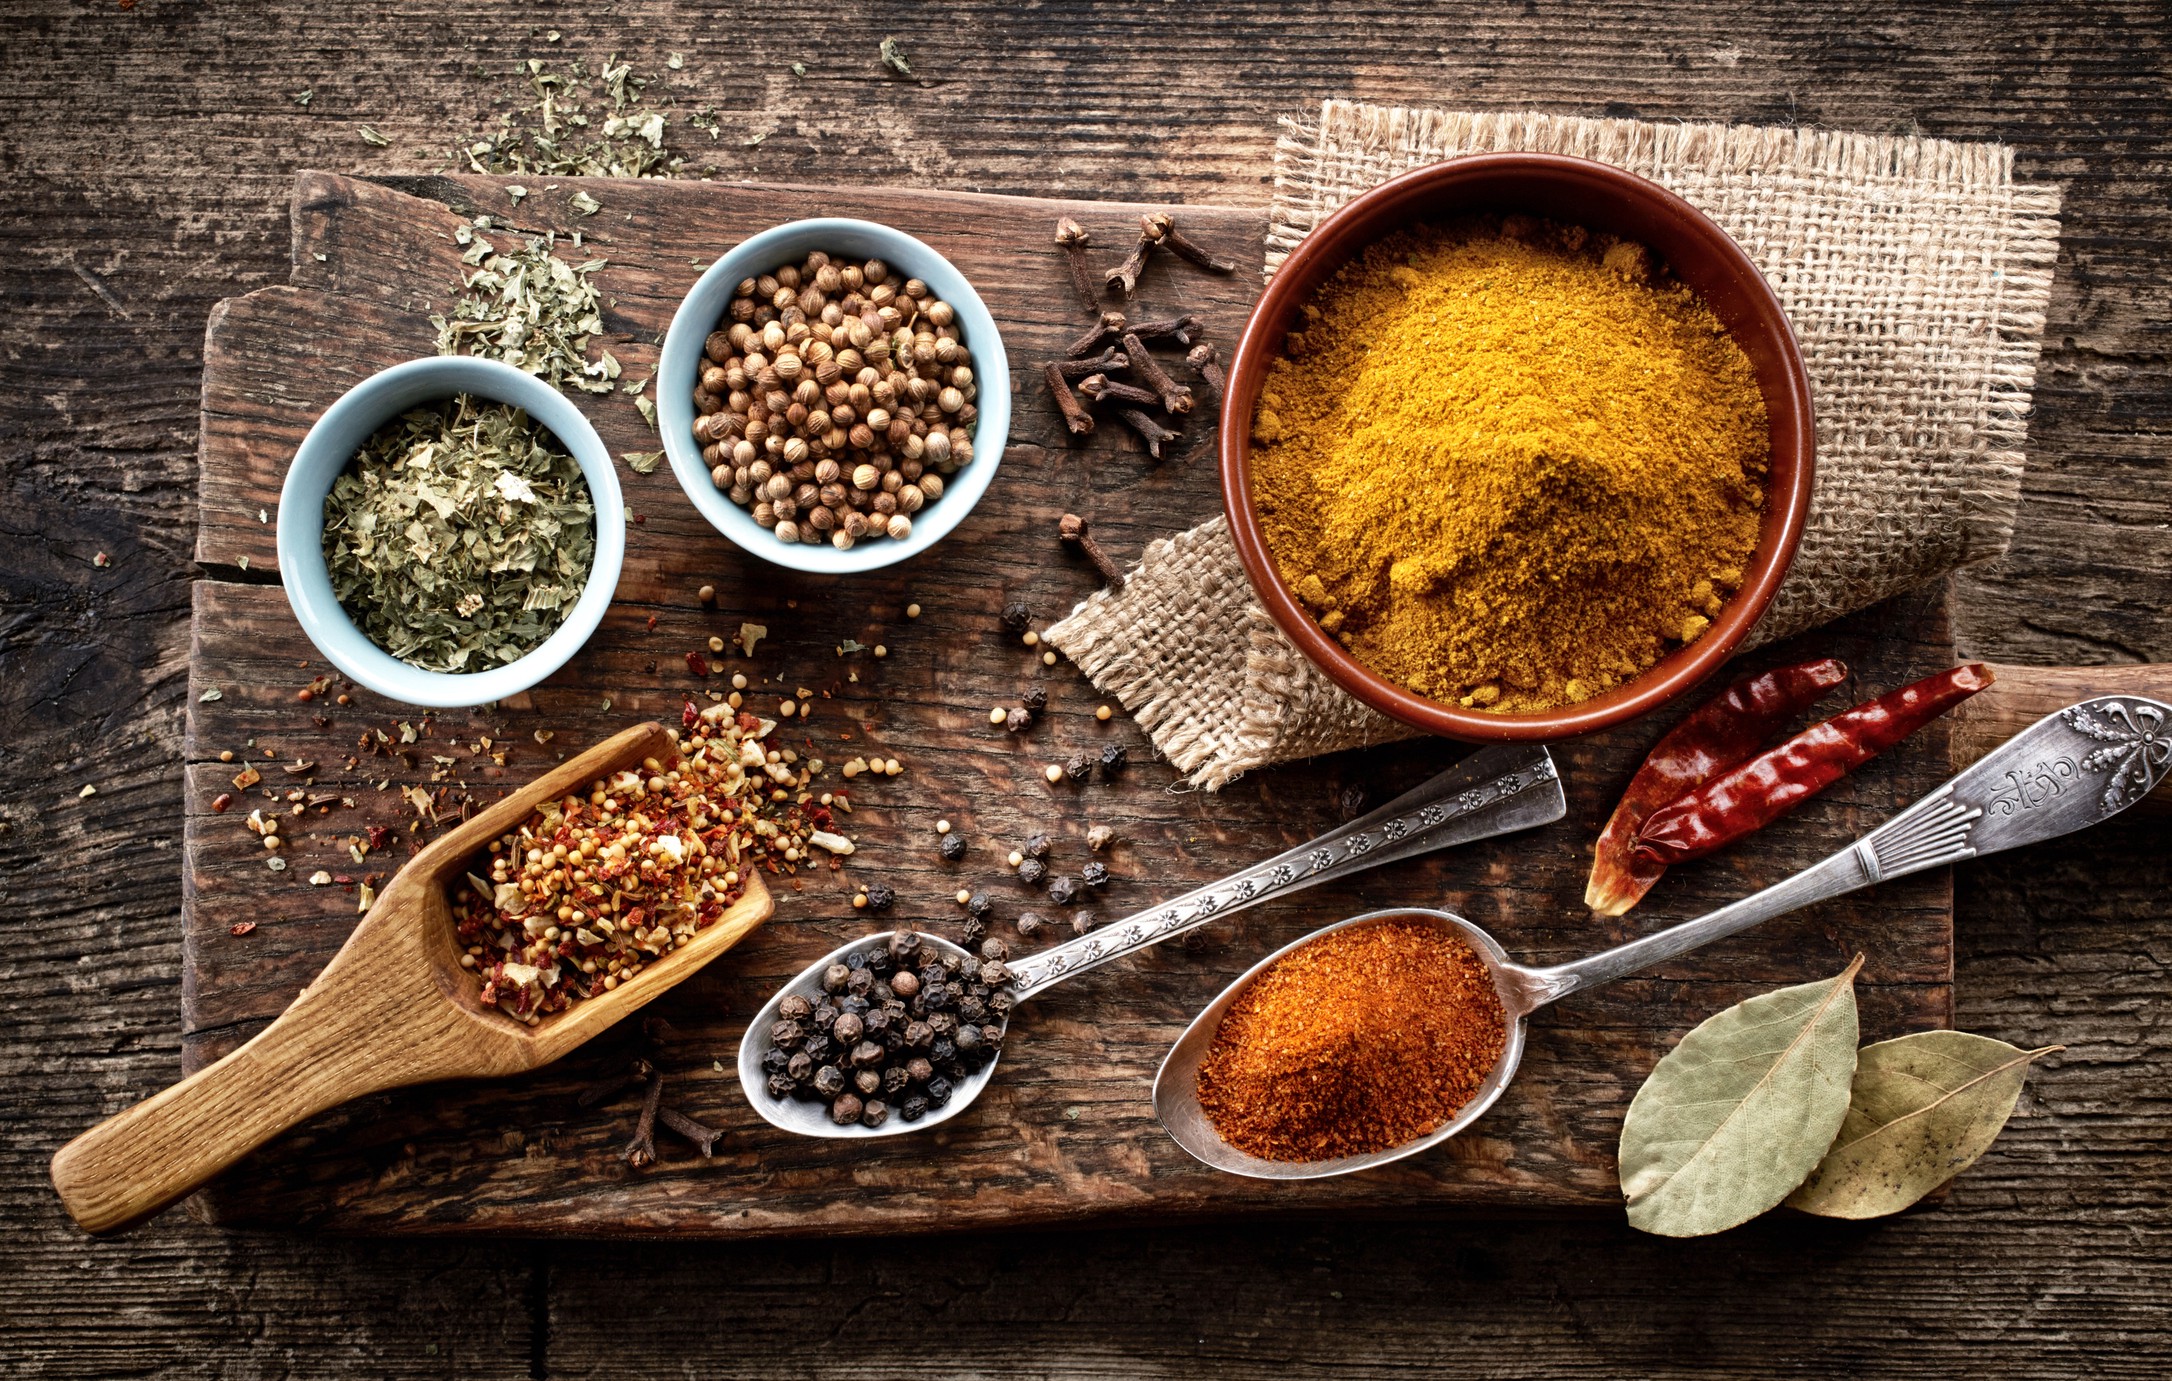 Increased Demand For Spicy Foods To Uplift The Global Organic Spice Market